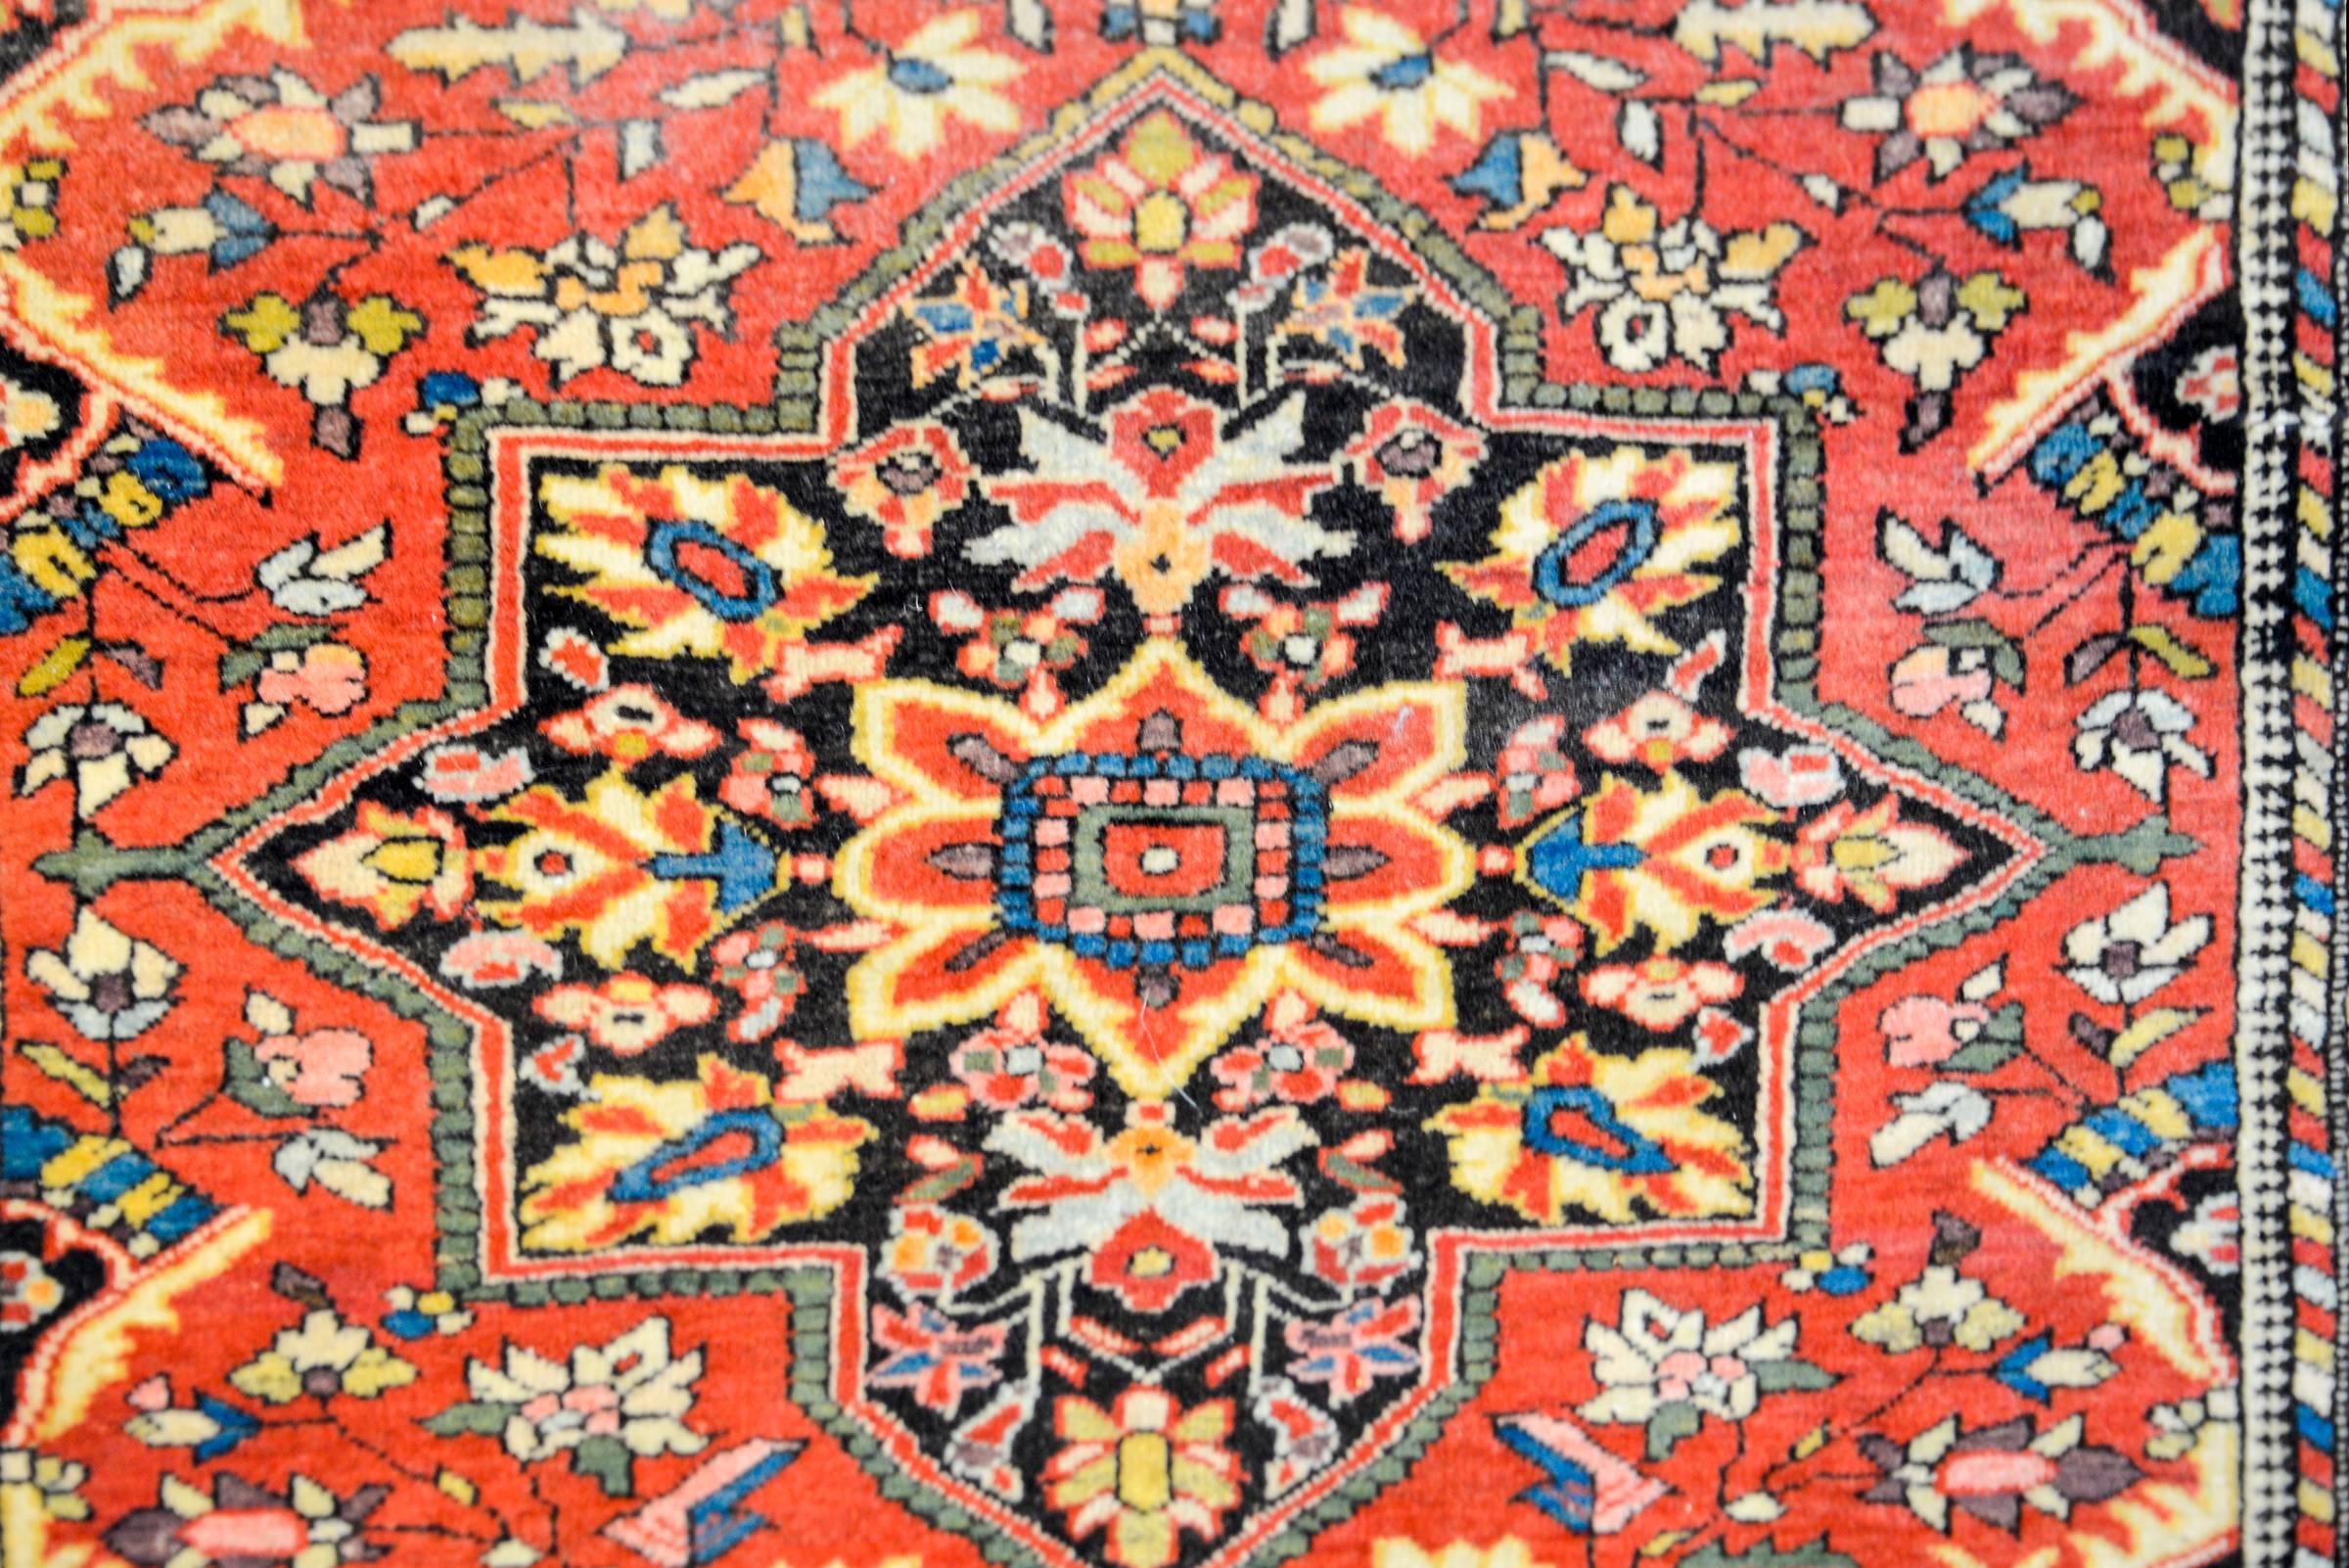 A 1930s Persian Sarouk Farahan rug with a large central medallion on a traditional stylized floral and vine patterned field woven in multicolored vegetable dyed crimson, indigo, yellow and green wool. The border is complex with multiple three